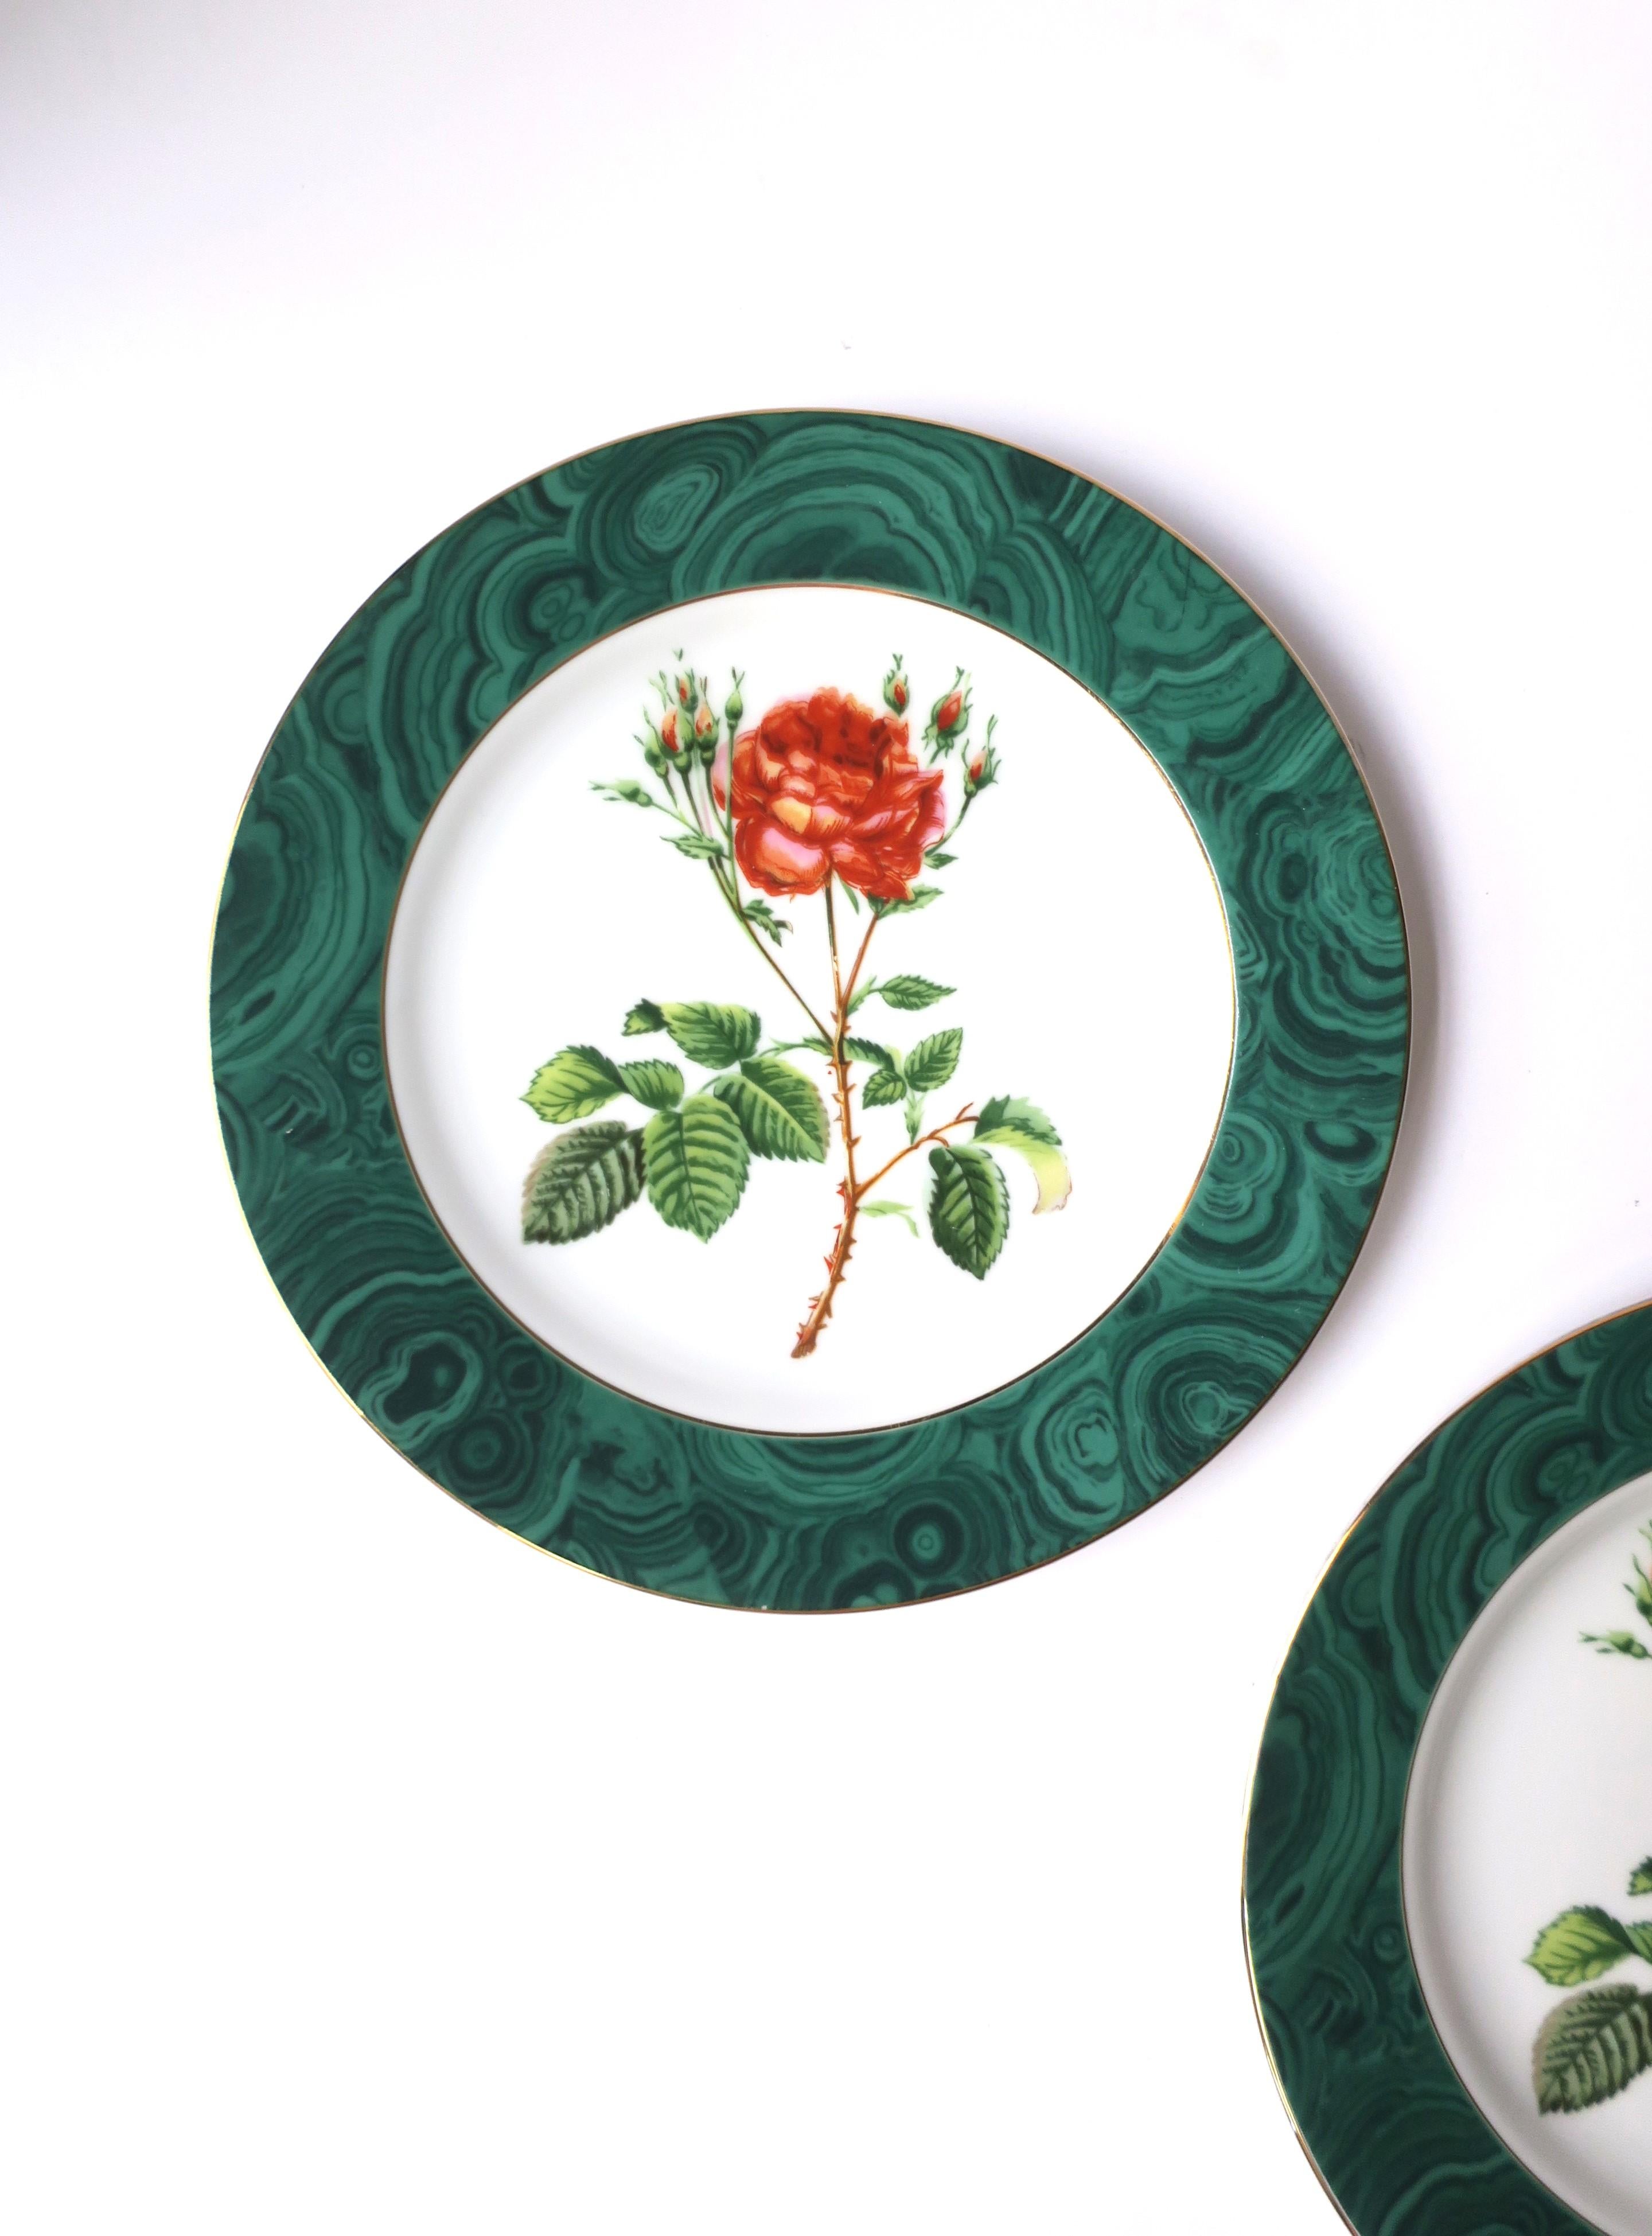 Green Malachite and Rose Chintz Porcelain Plates, Set of 2 In Excellent Condition For Sale In New York, NY